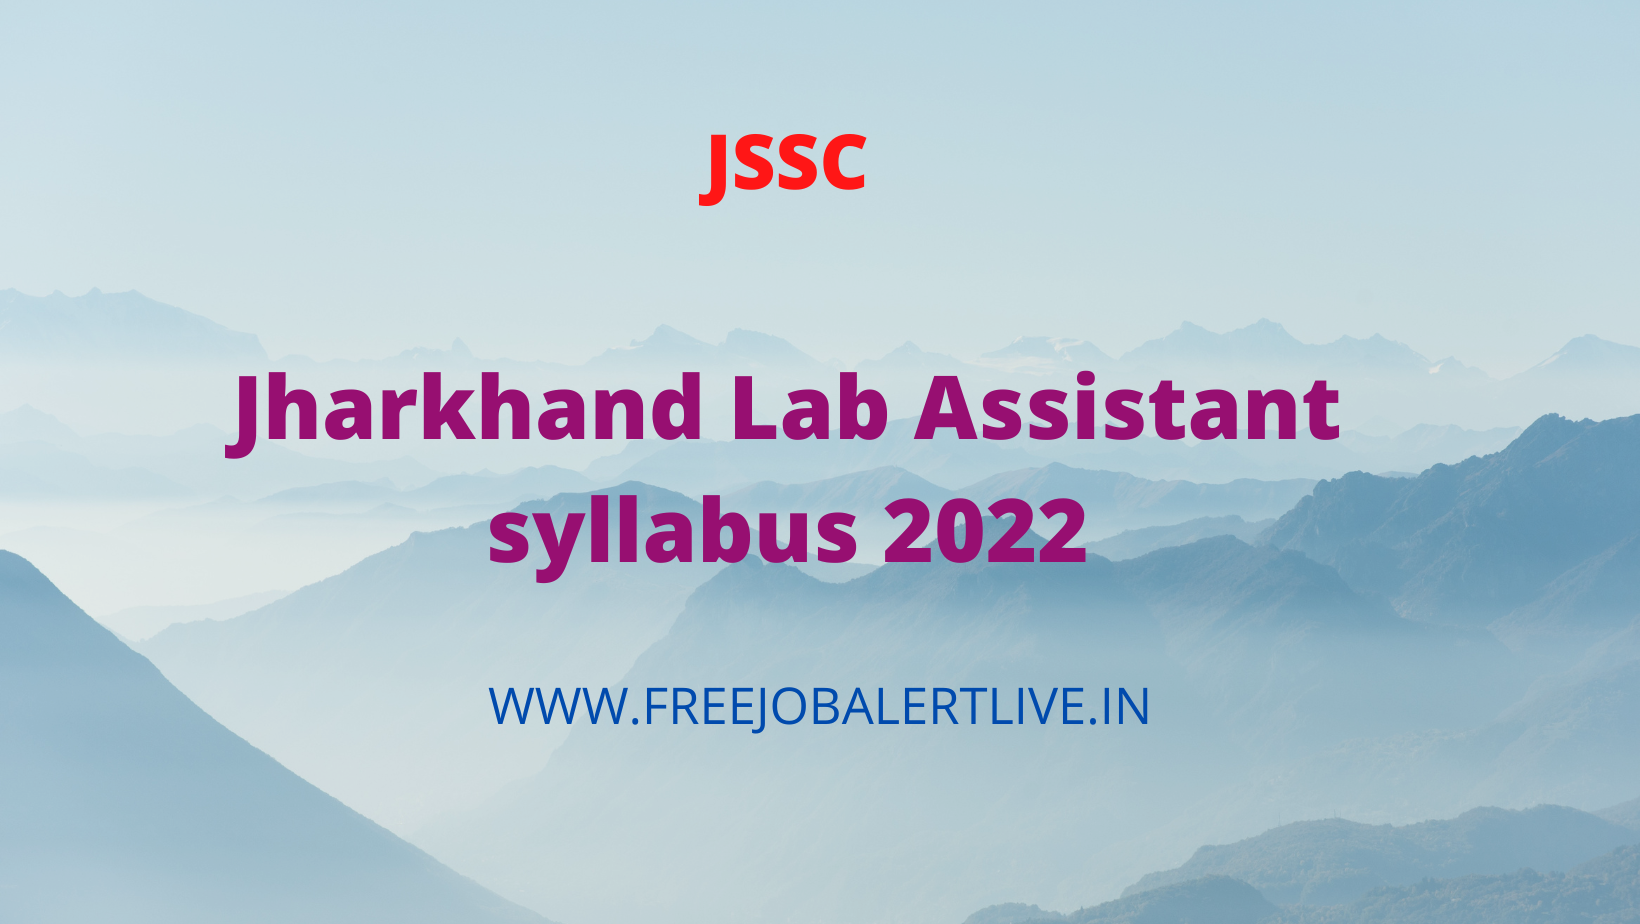 Jharkhand Lab Assistant syllabus 2022